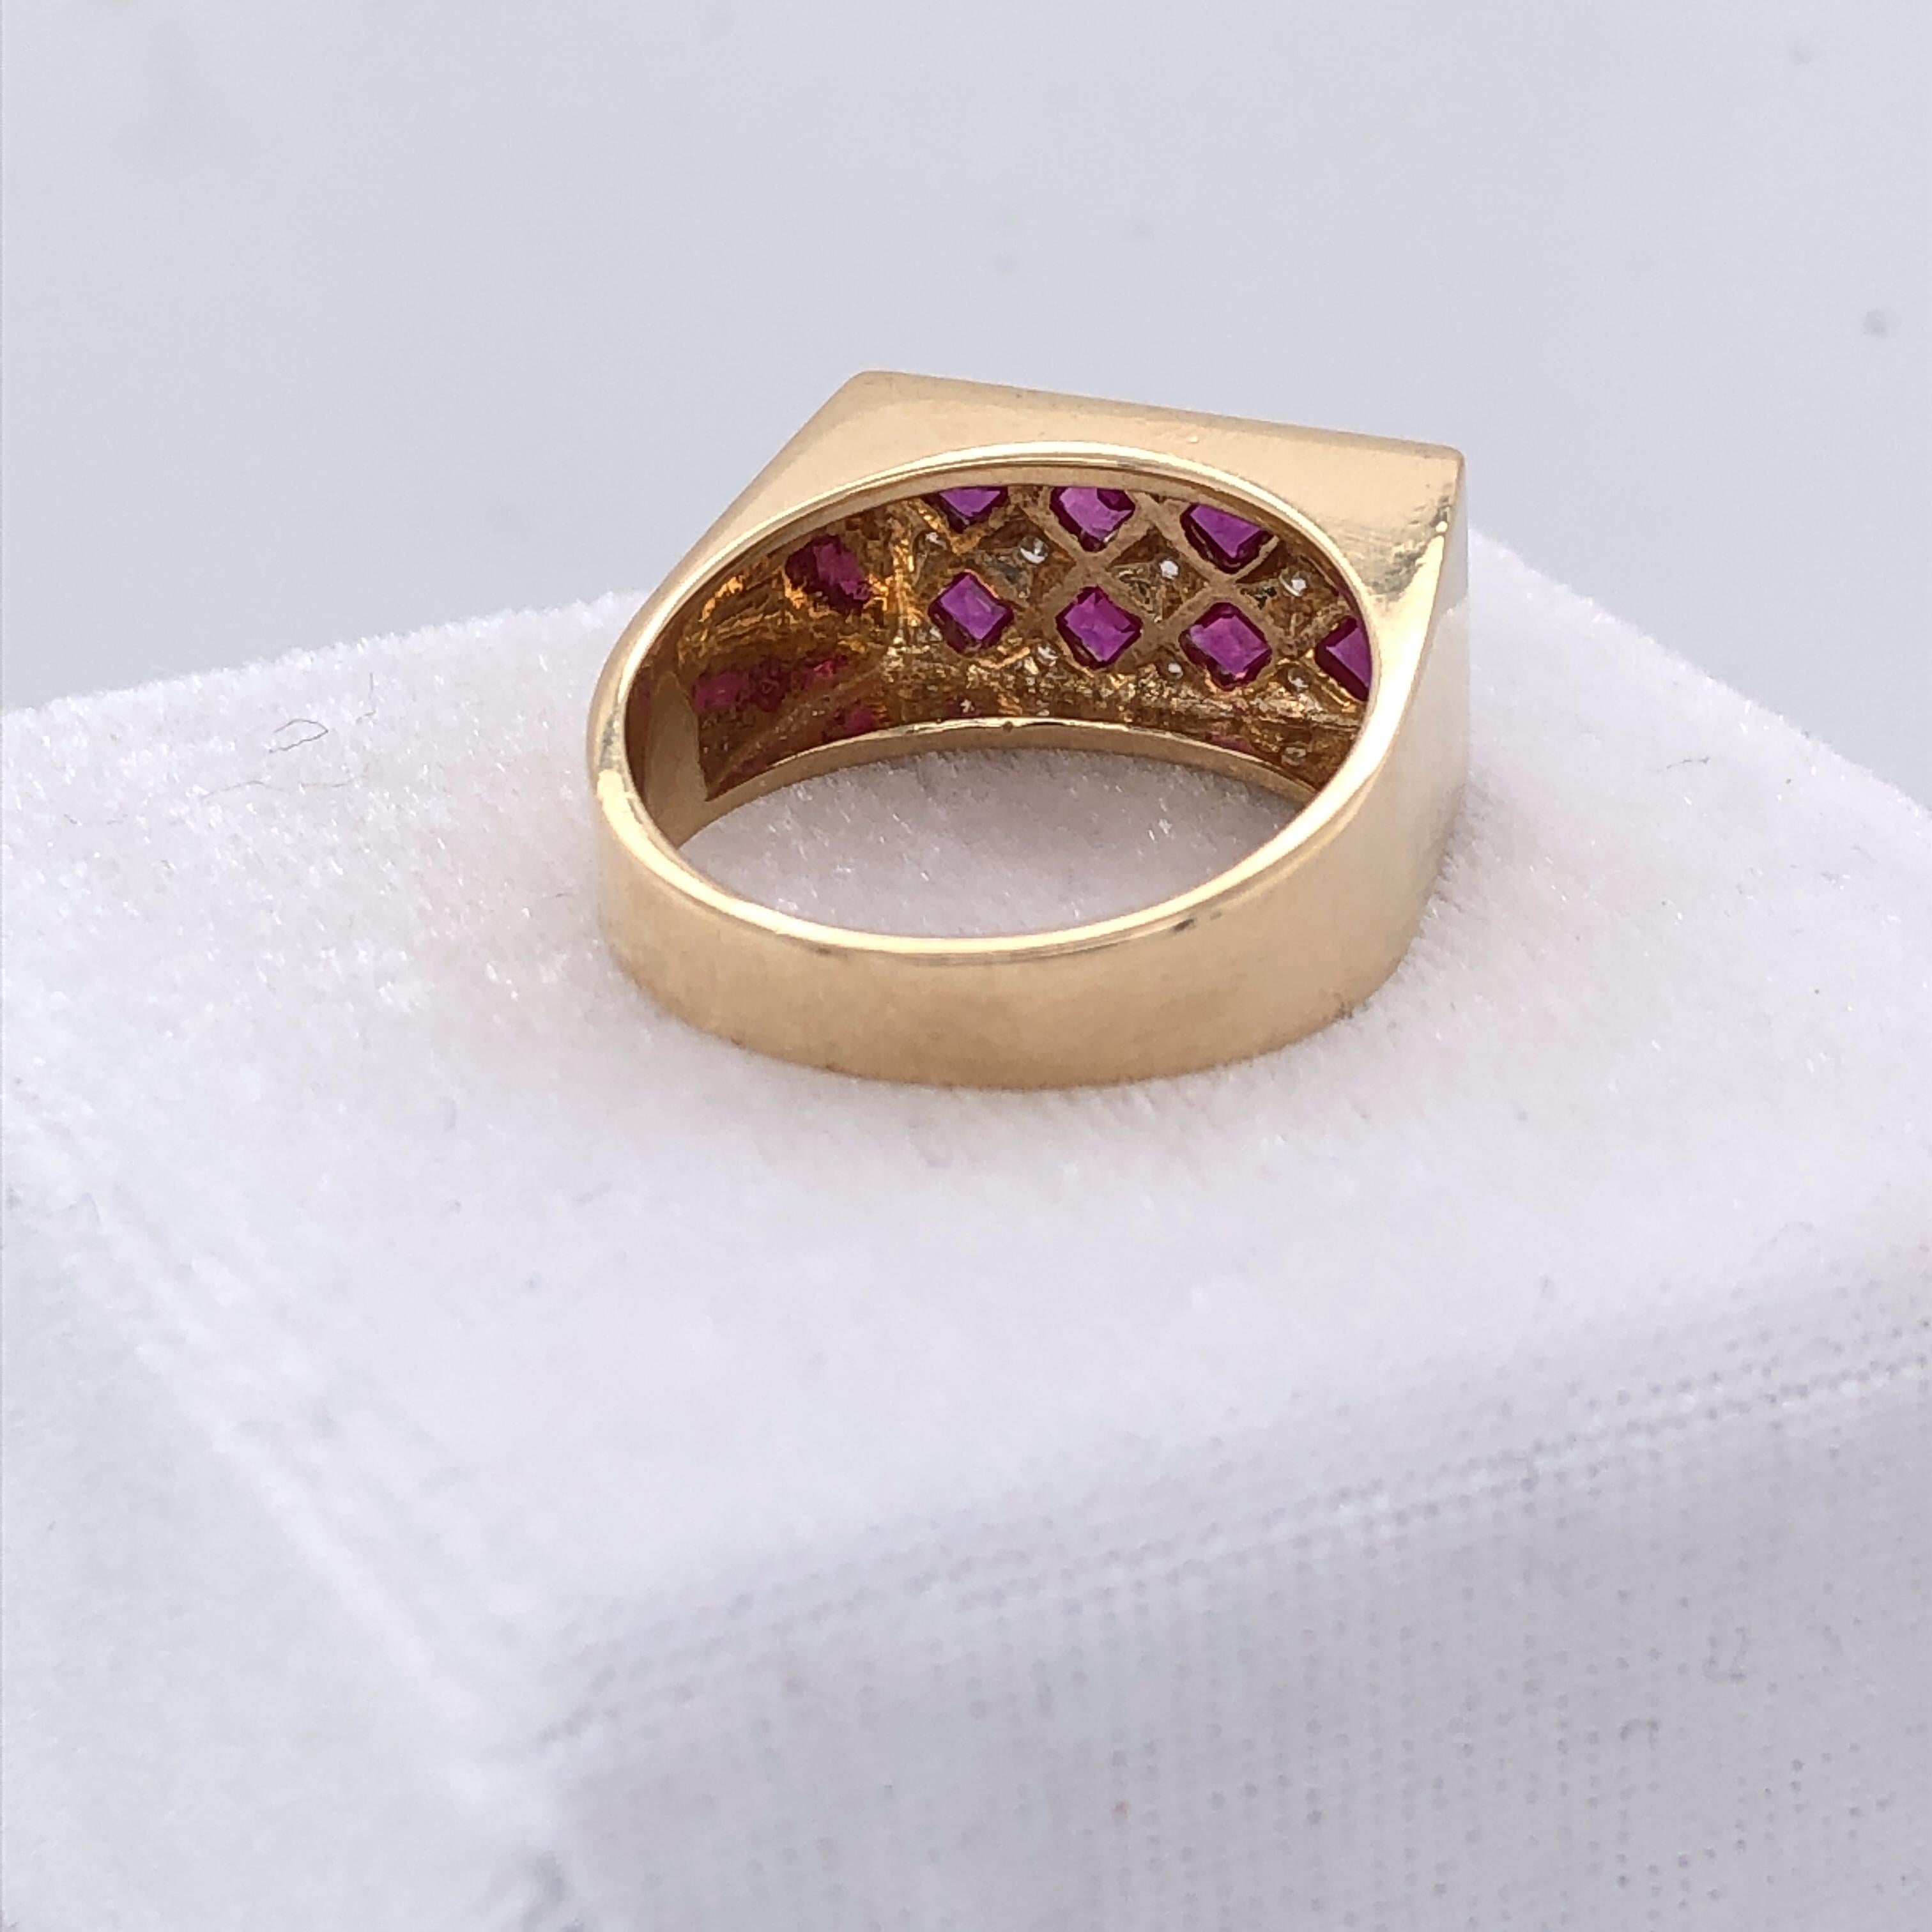 One 18 karat yellow gold ring set with eight 2.2mm square rubies, approximately 0.75 carat total weight and fifteen 1mm round brilliant diamonds approximately 0.20 carat total weight with K/L color and I1 clarity.  The top of the ring measures 16.5